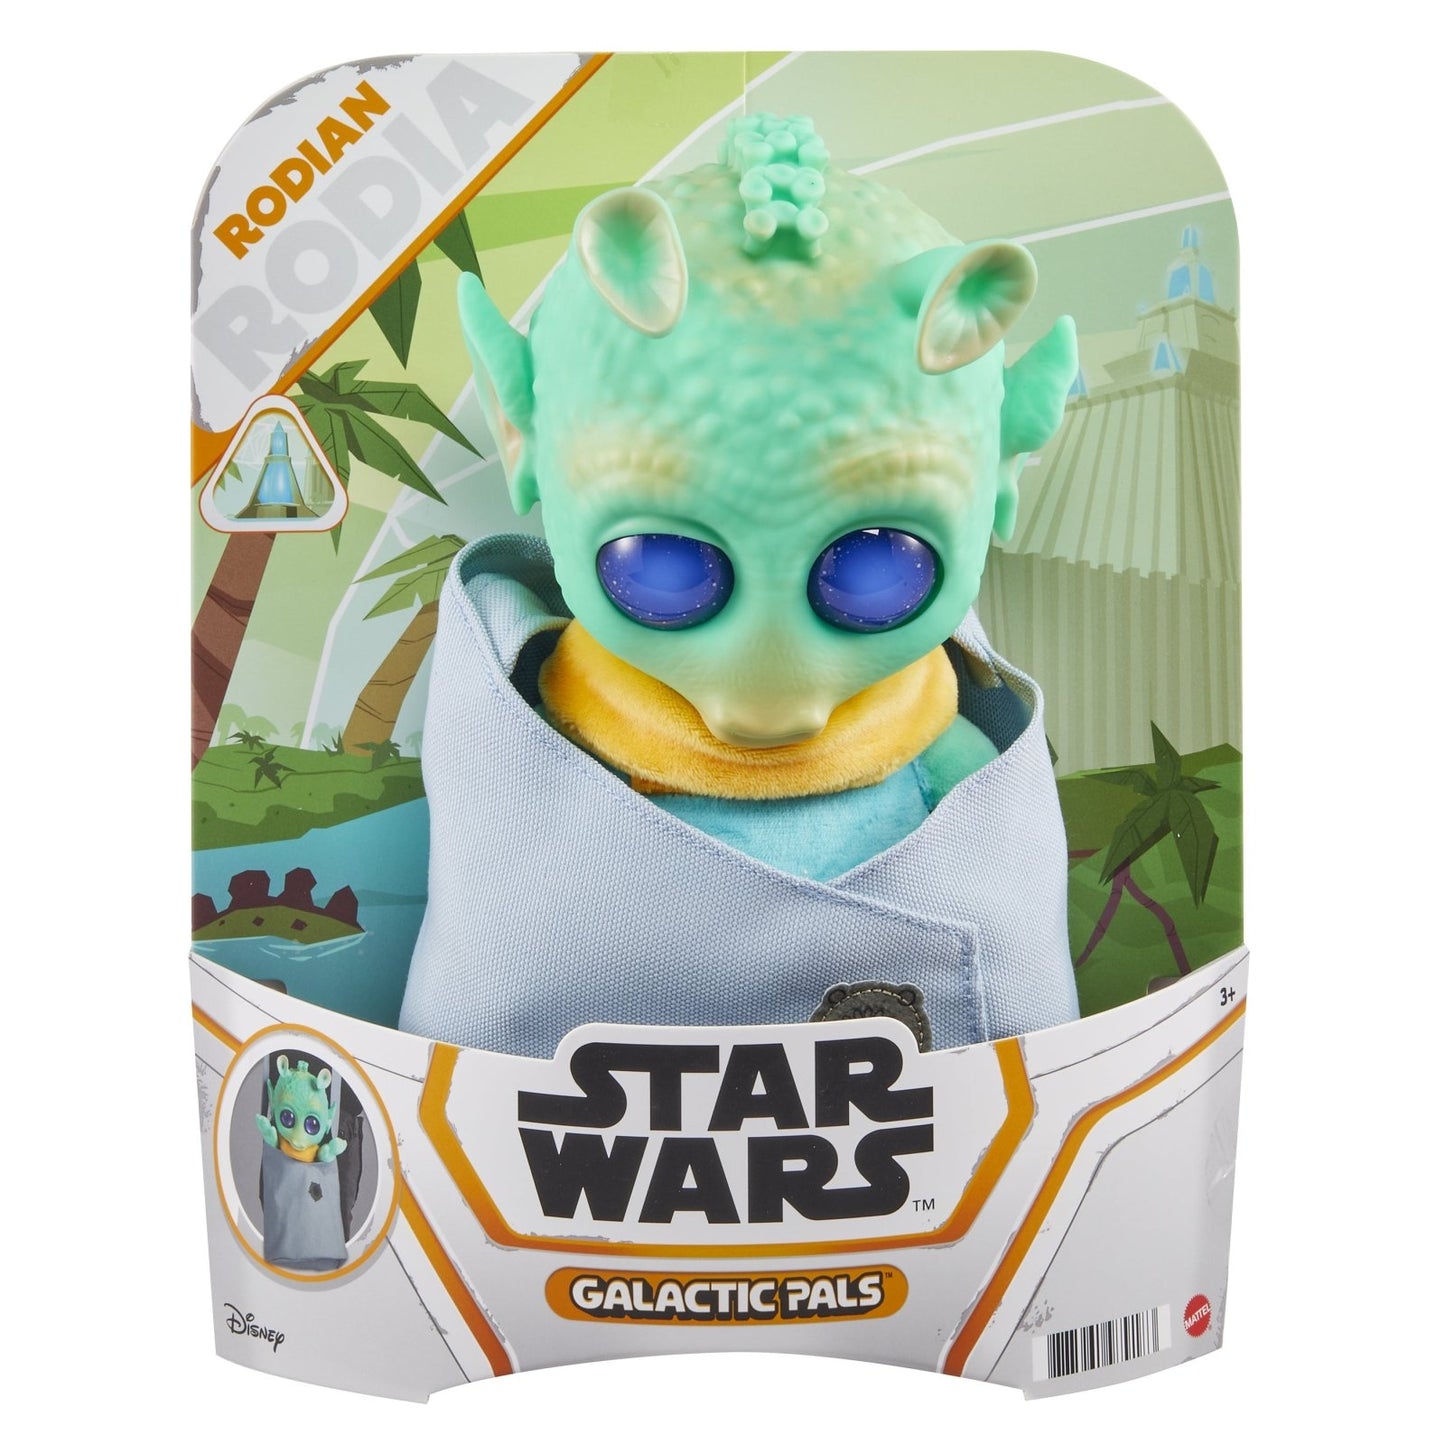 Star Wars: Galactic Pals Plushes - The Fourth Place